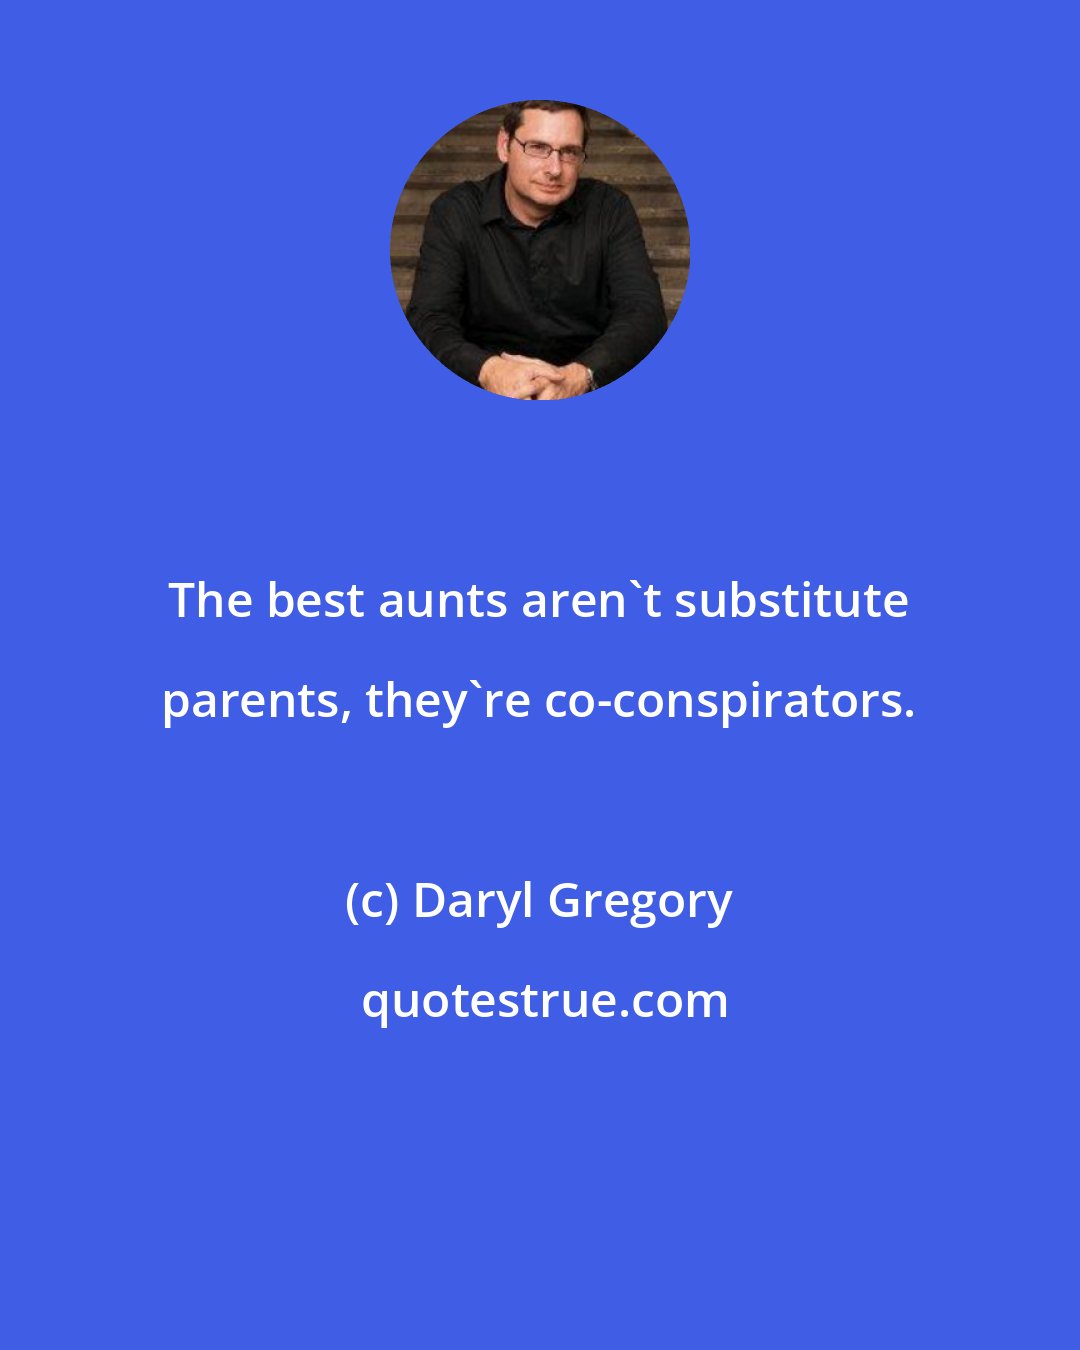 Daryl Gregory: The best aunts aren't substitute parents, they're co-conspirators.